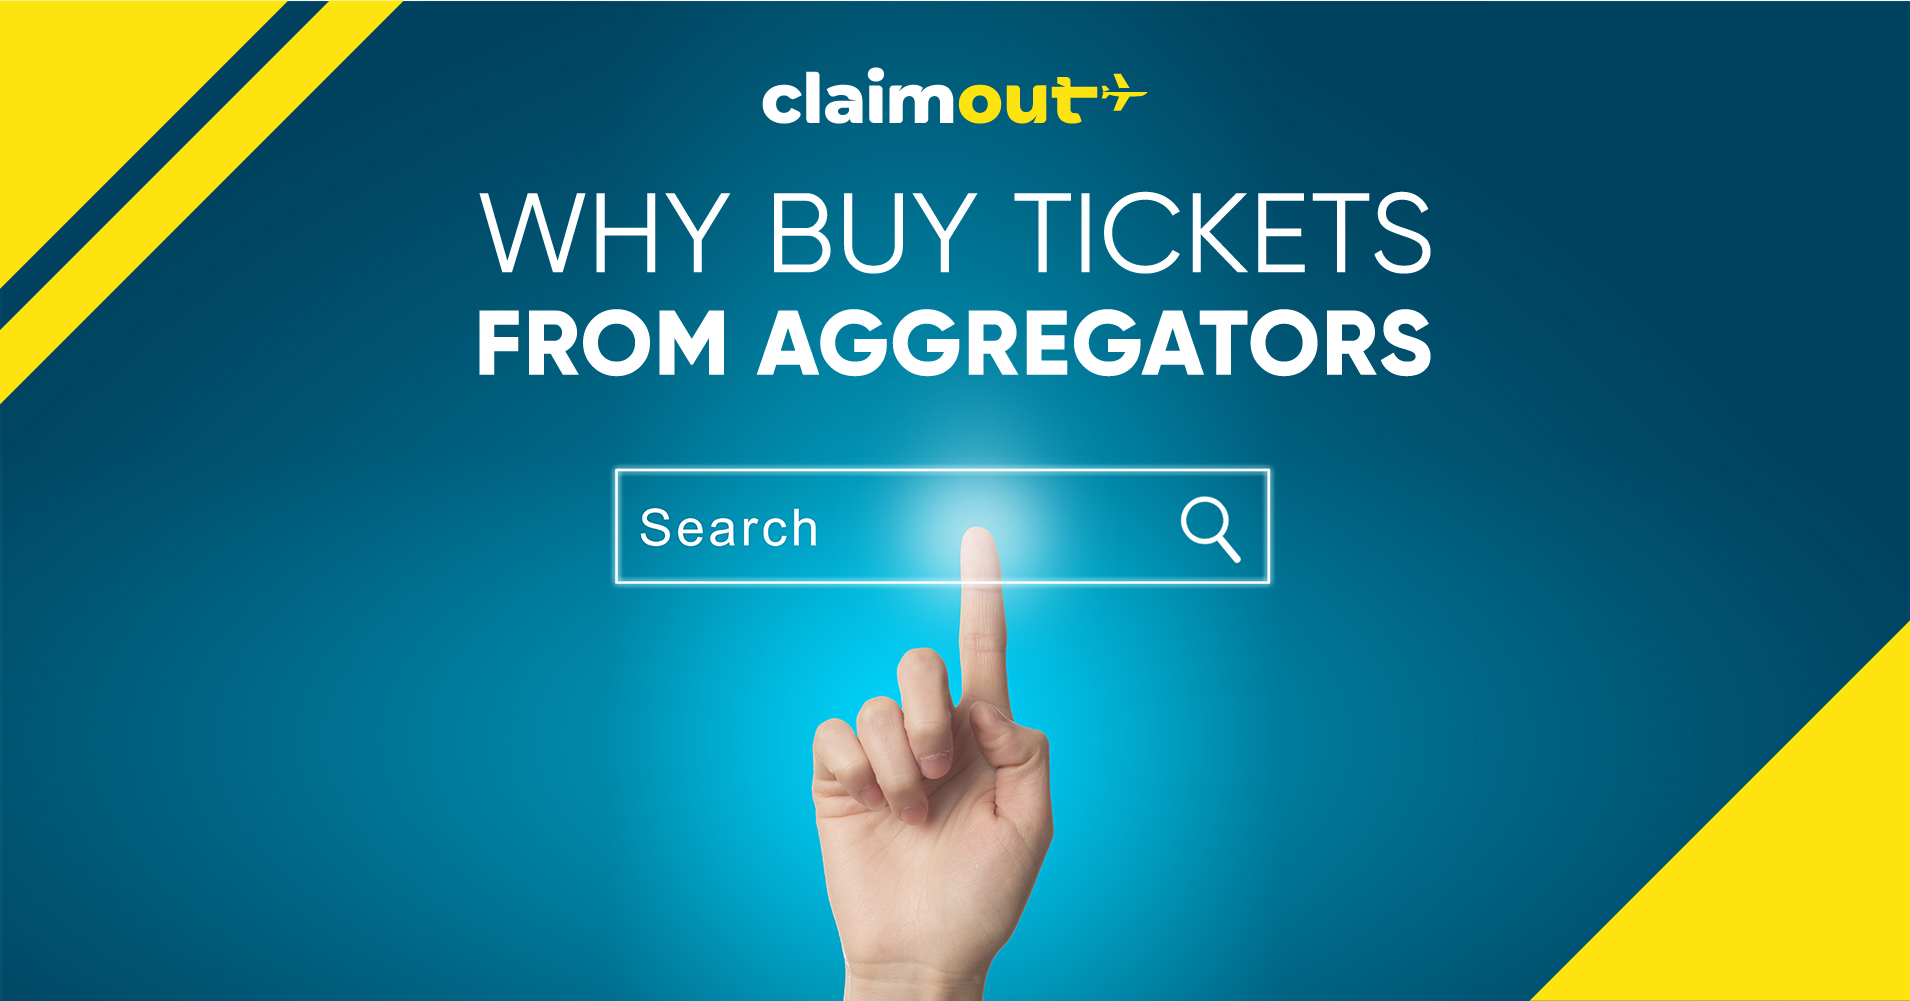 Why Buy Tickets from Aggregators